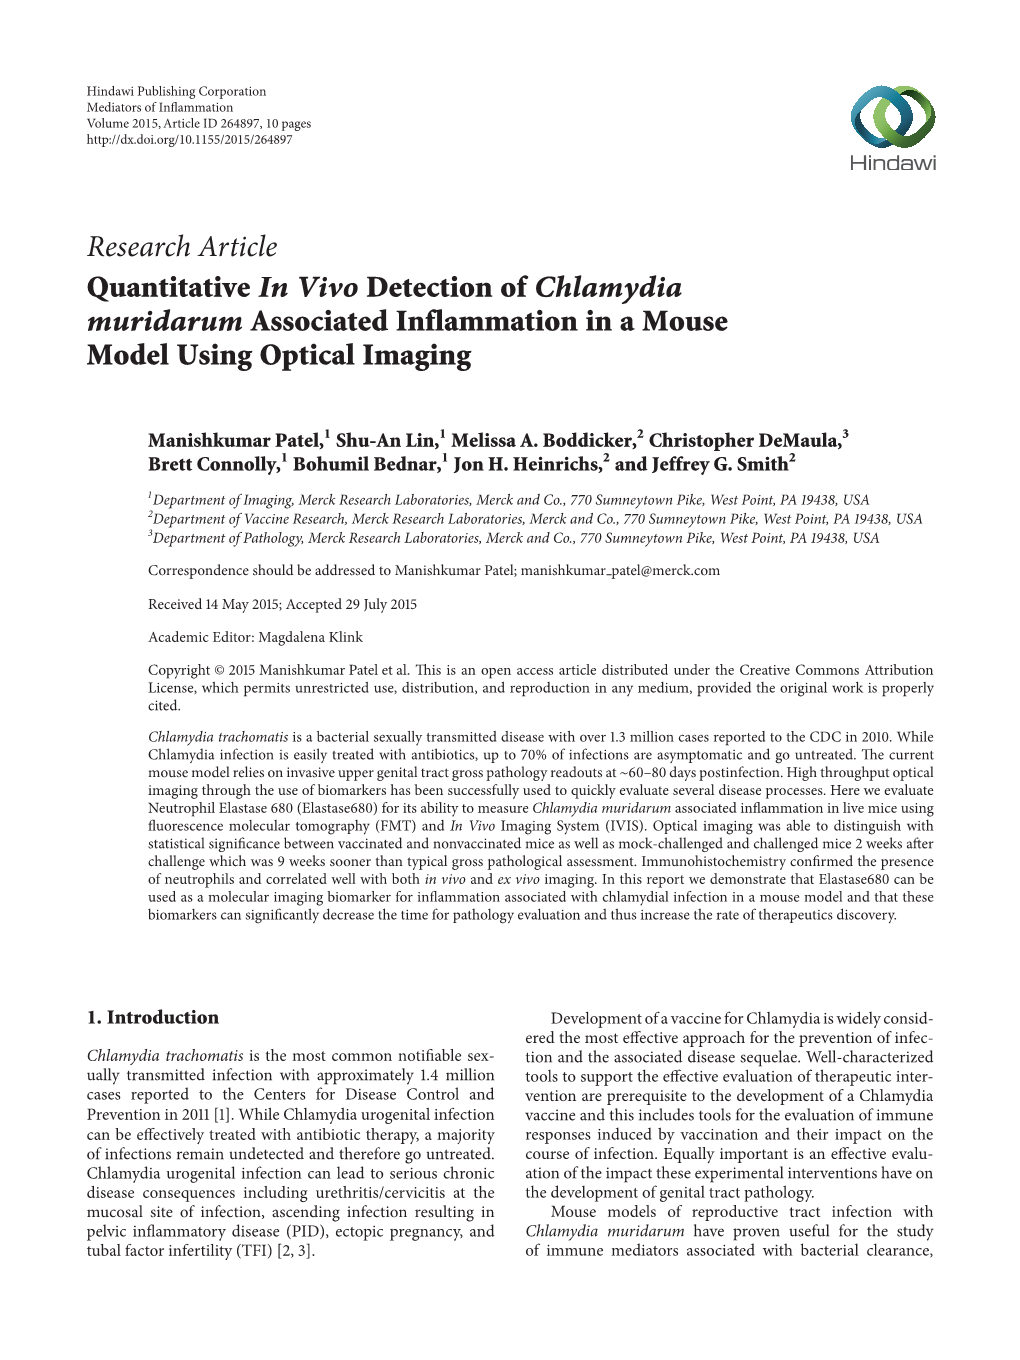 Quantitative in Vivo Detection of Chlamydia Muridarum Associated Inflammation in a Mouse Model Using Optical Imaging